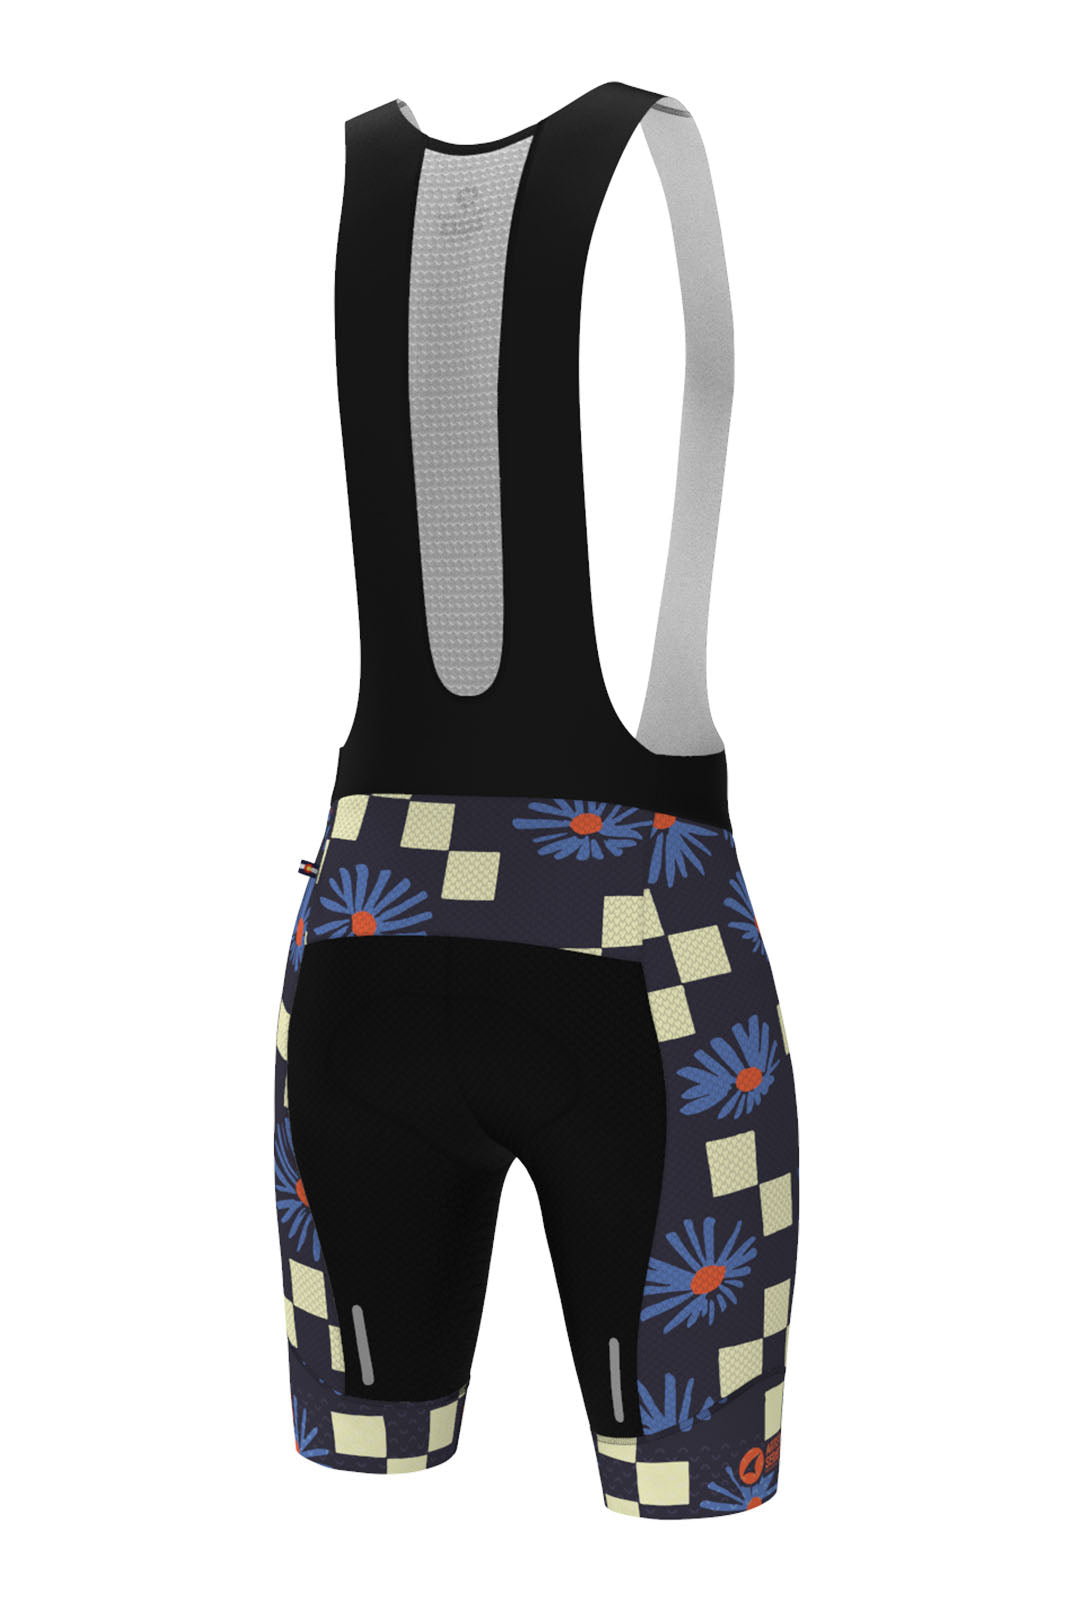 Men's Unique Cycling Bibs - Aster Check Navy Back View